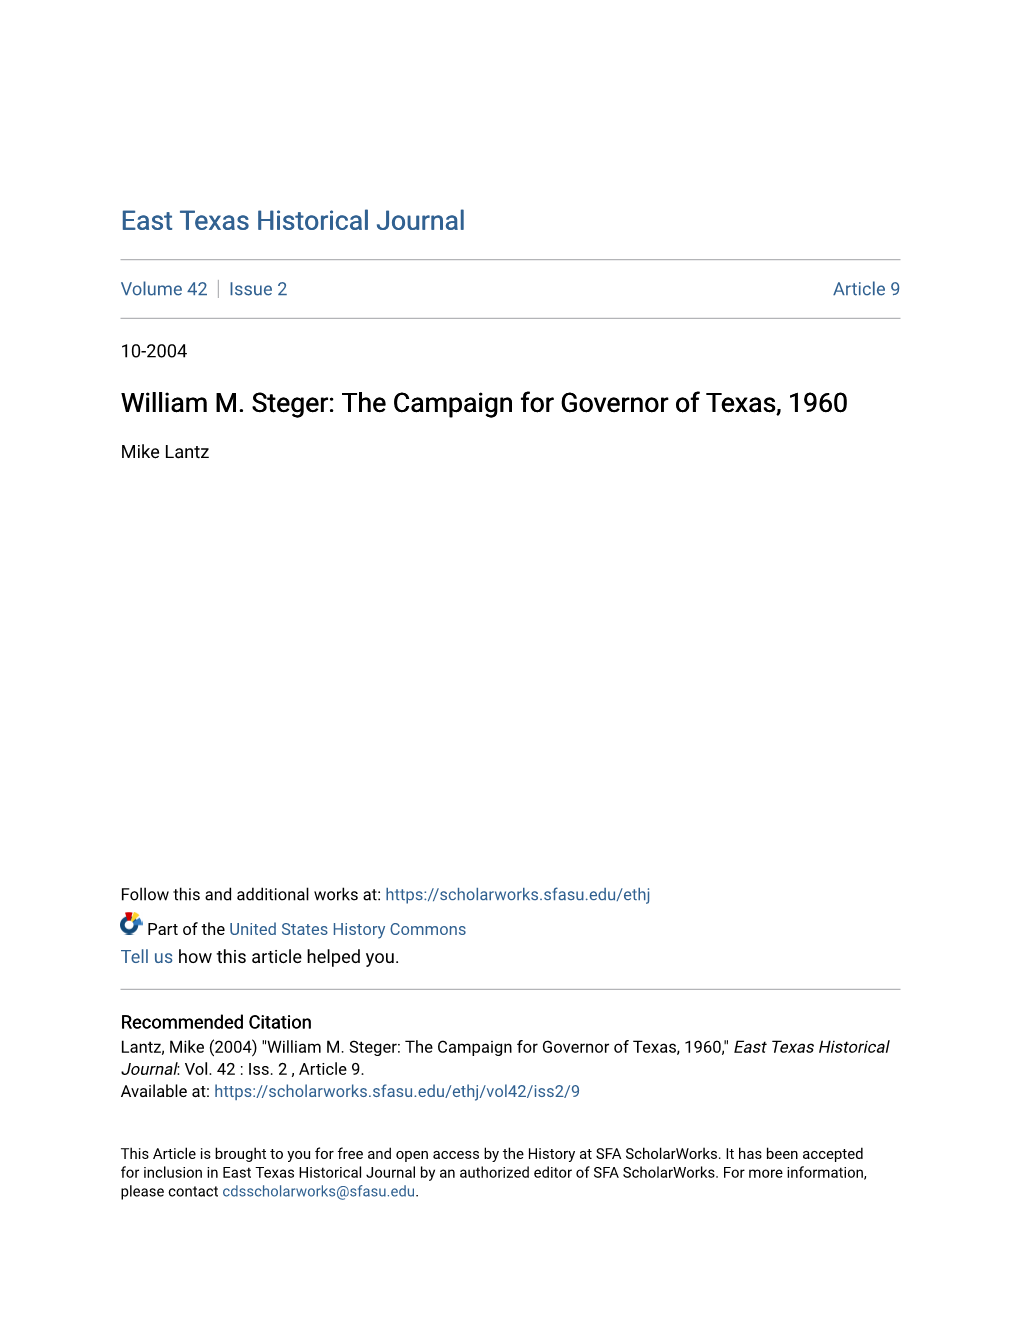 William M. Steger: the Campaign for Governor of Texas, 1960